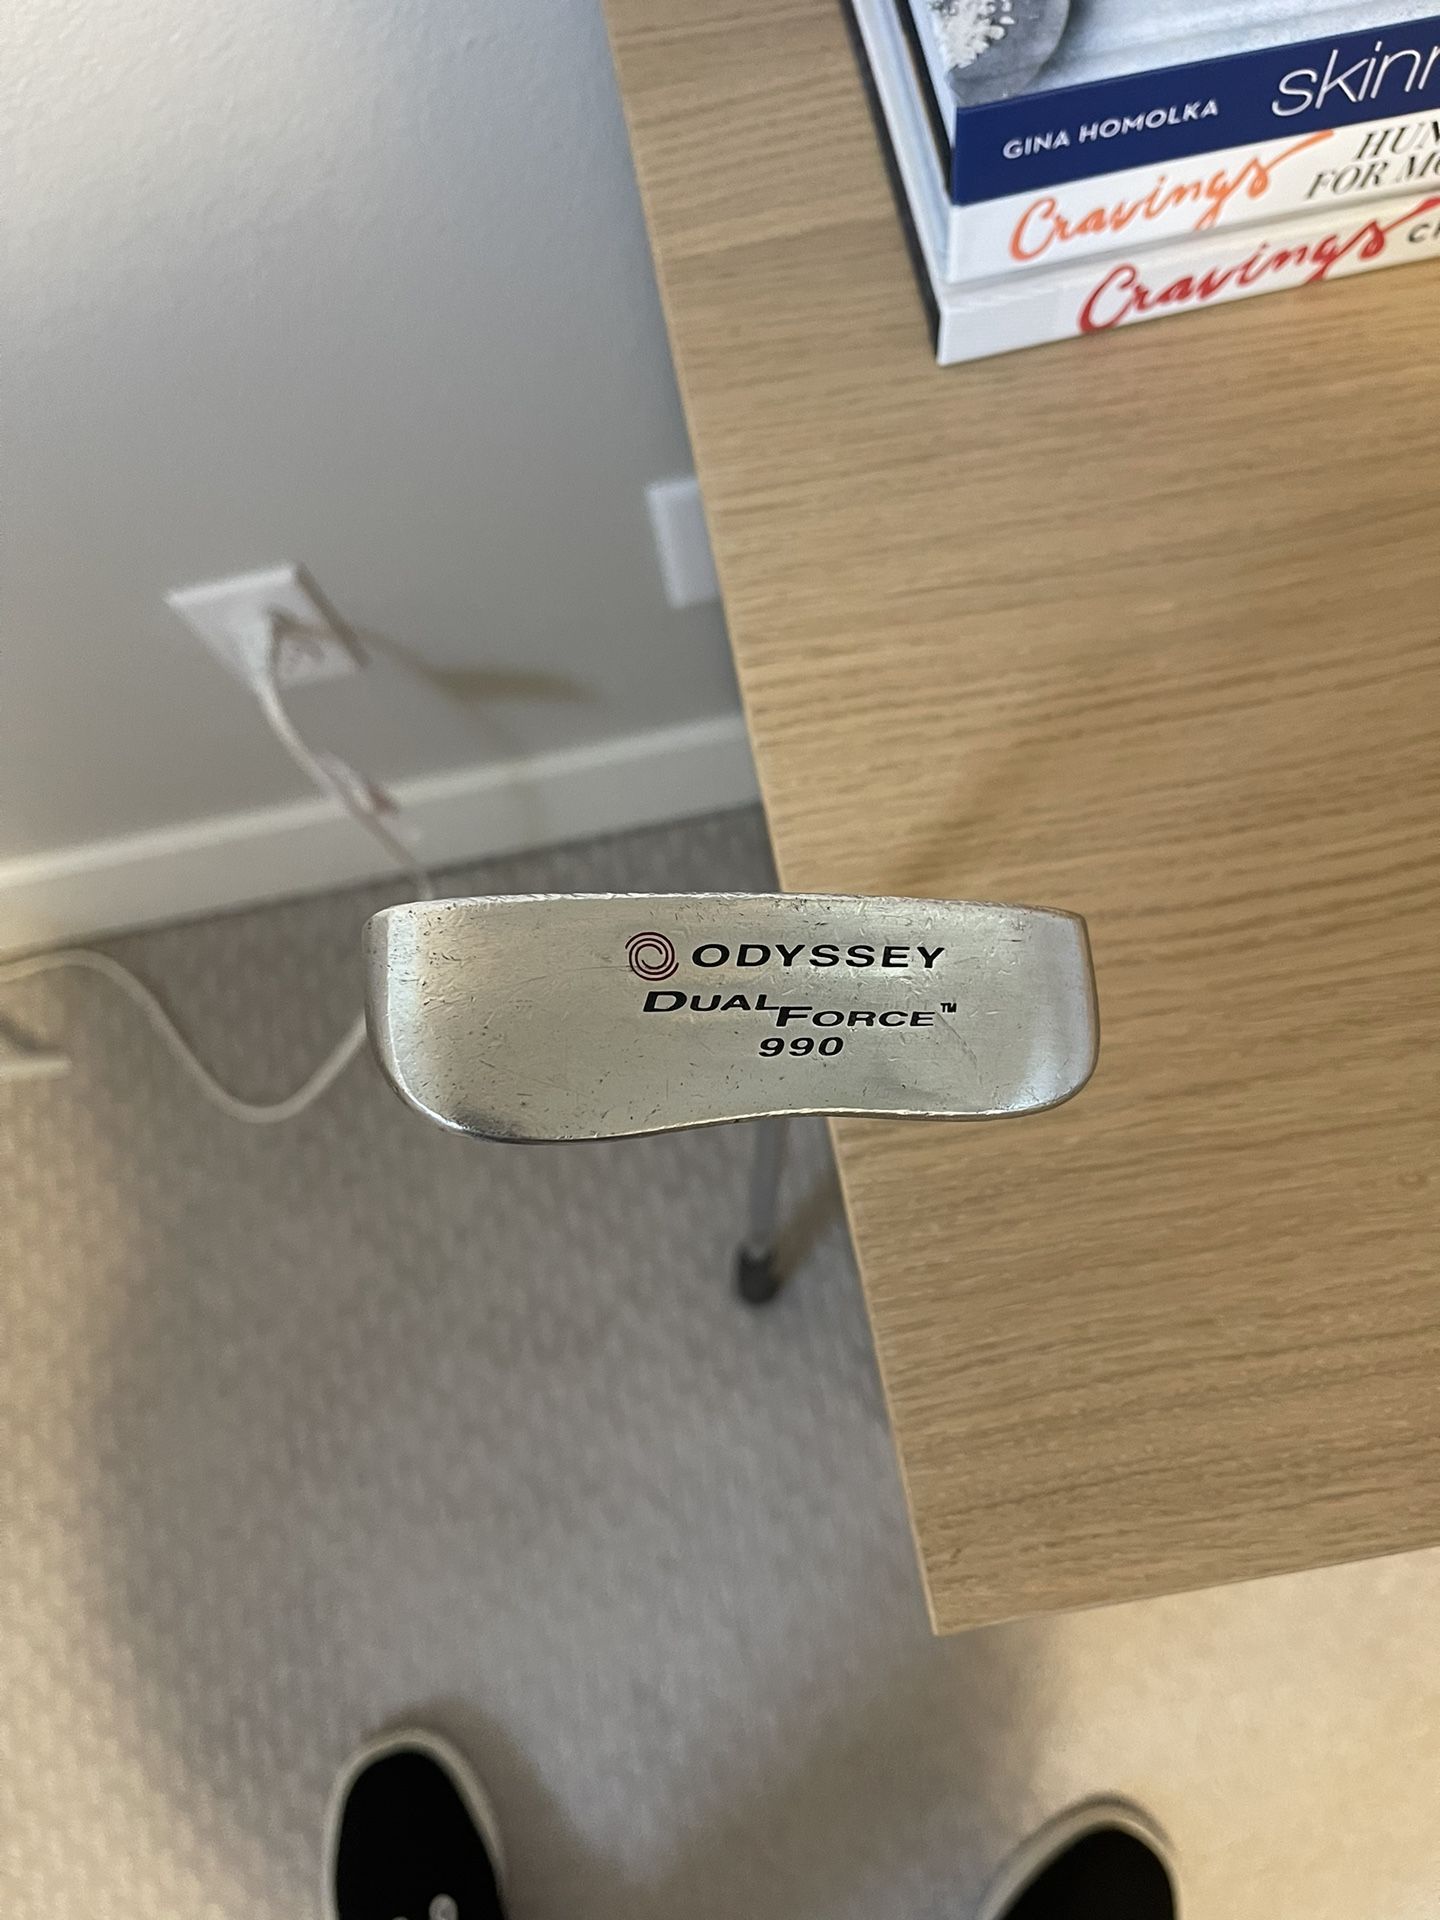 Odyssey Dual Force Putter